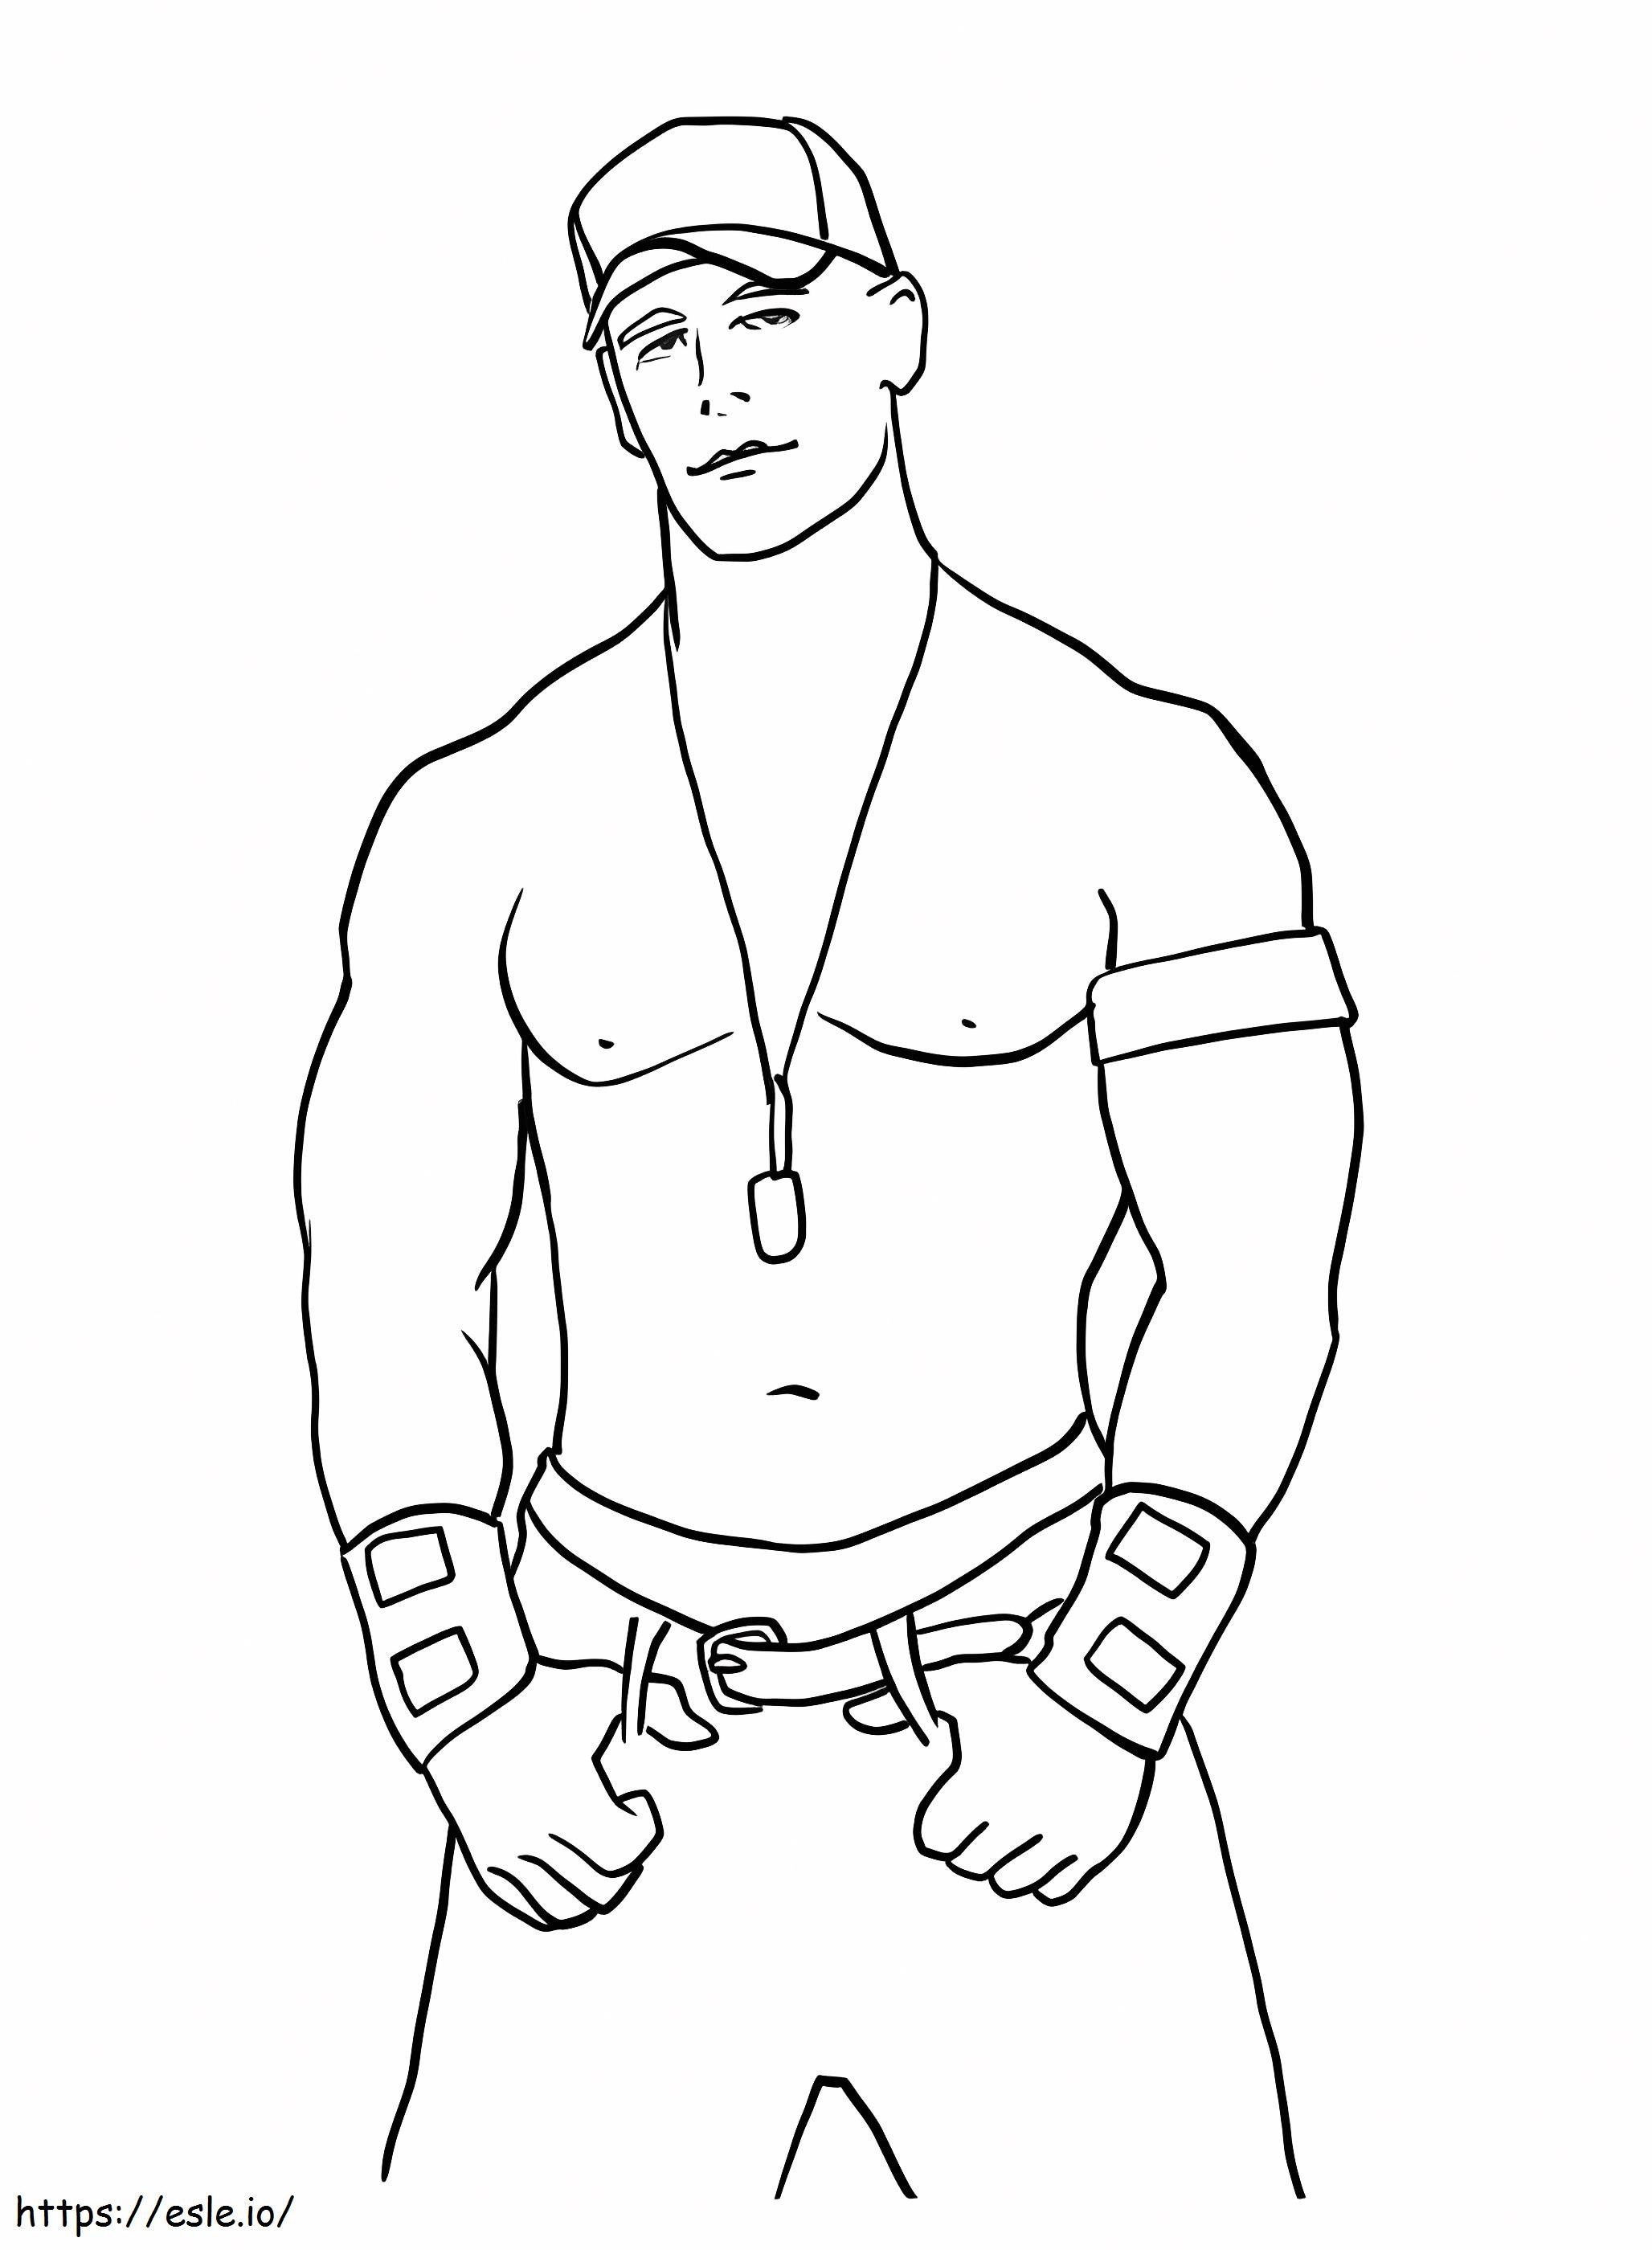 John Cena Is Cool coloring page